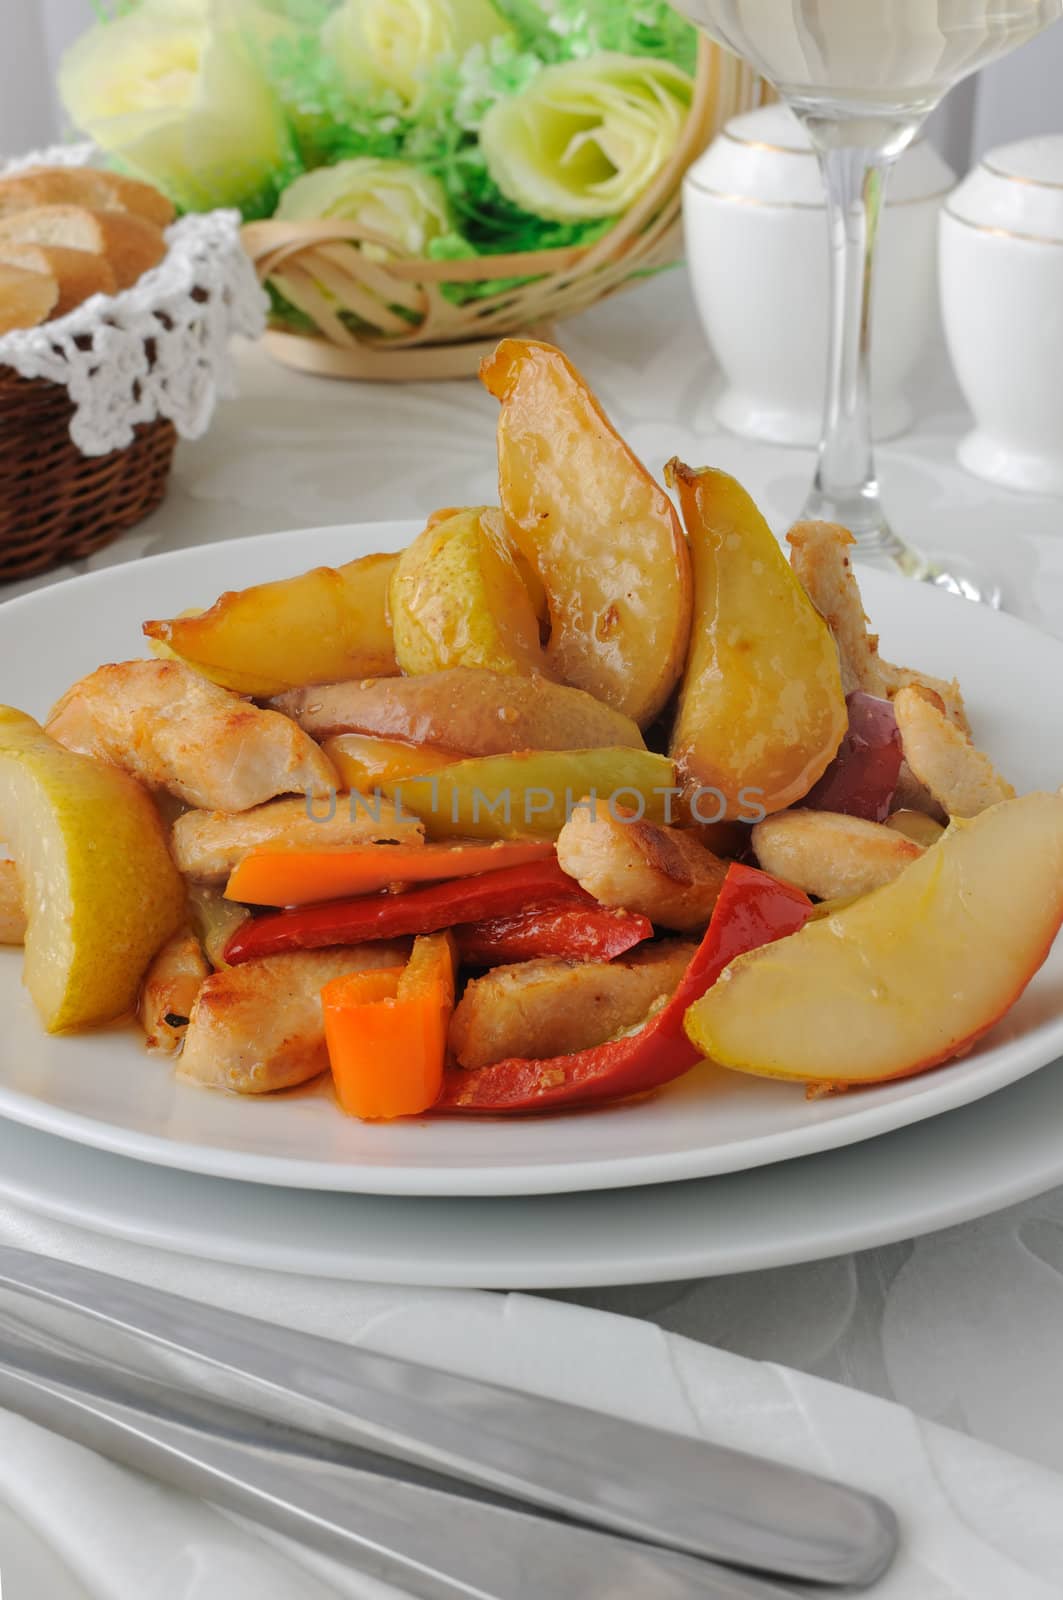 Salad of chicken and caramelized pears by Apolonia